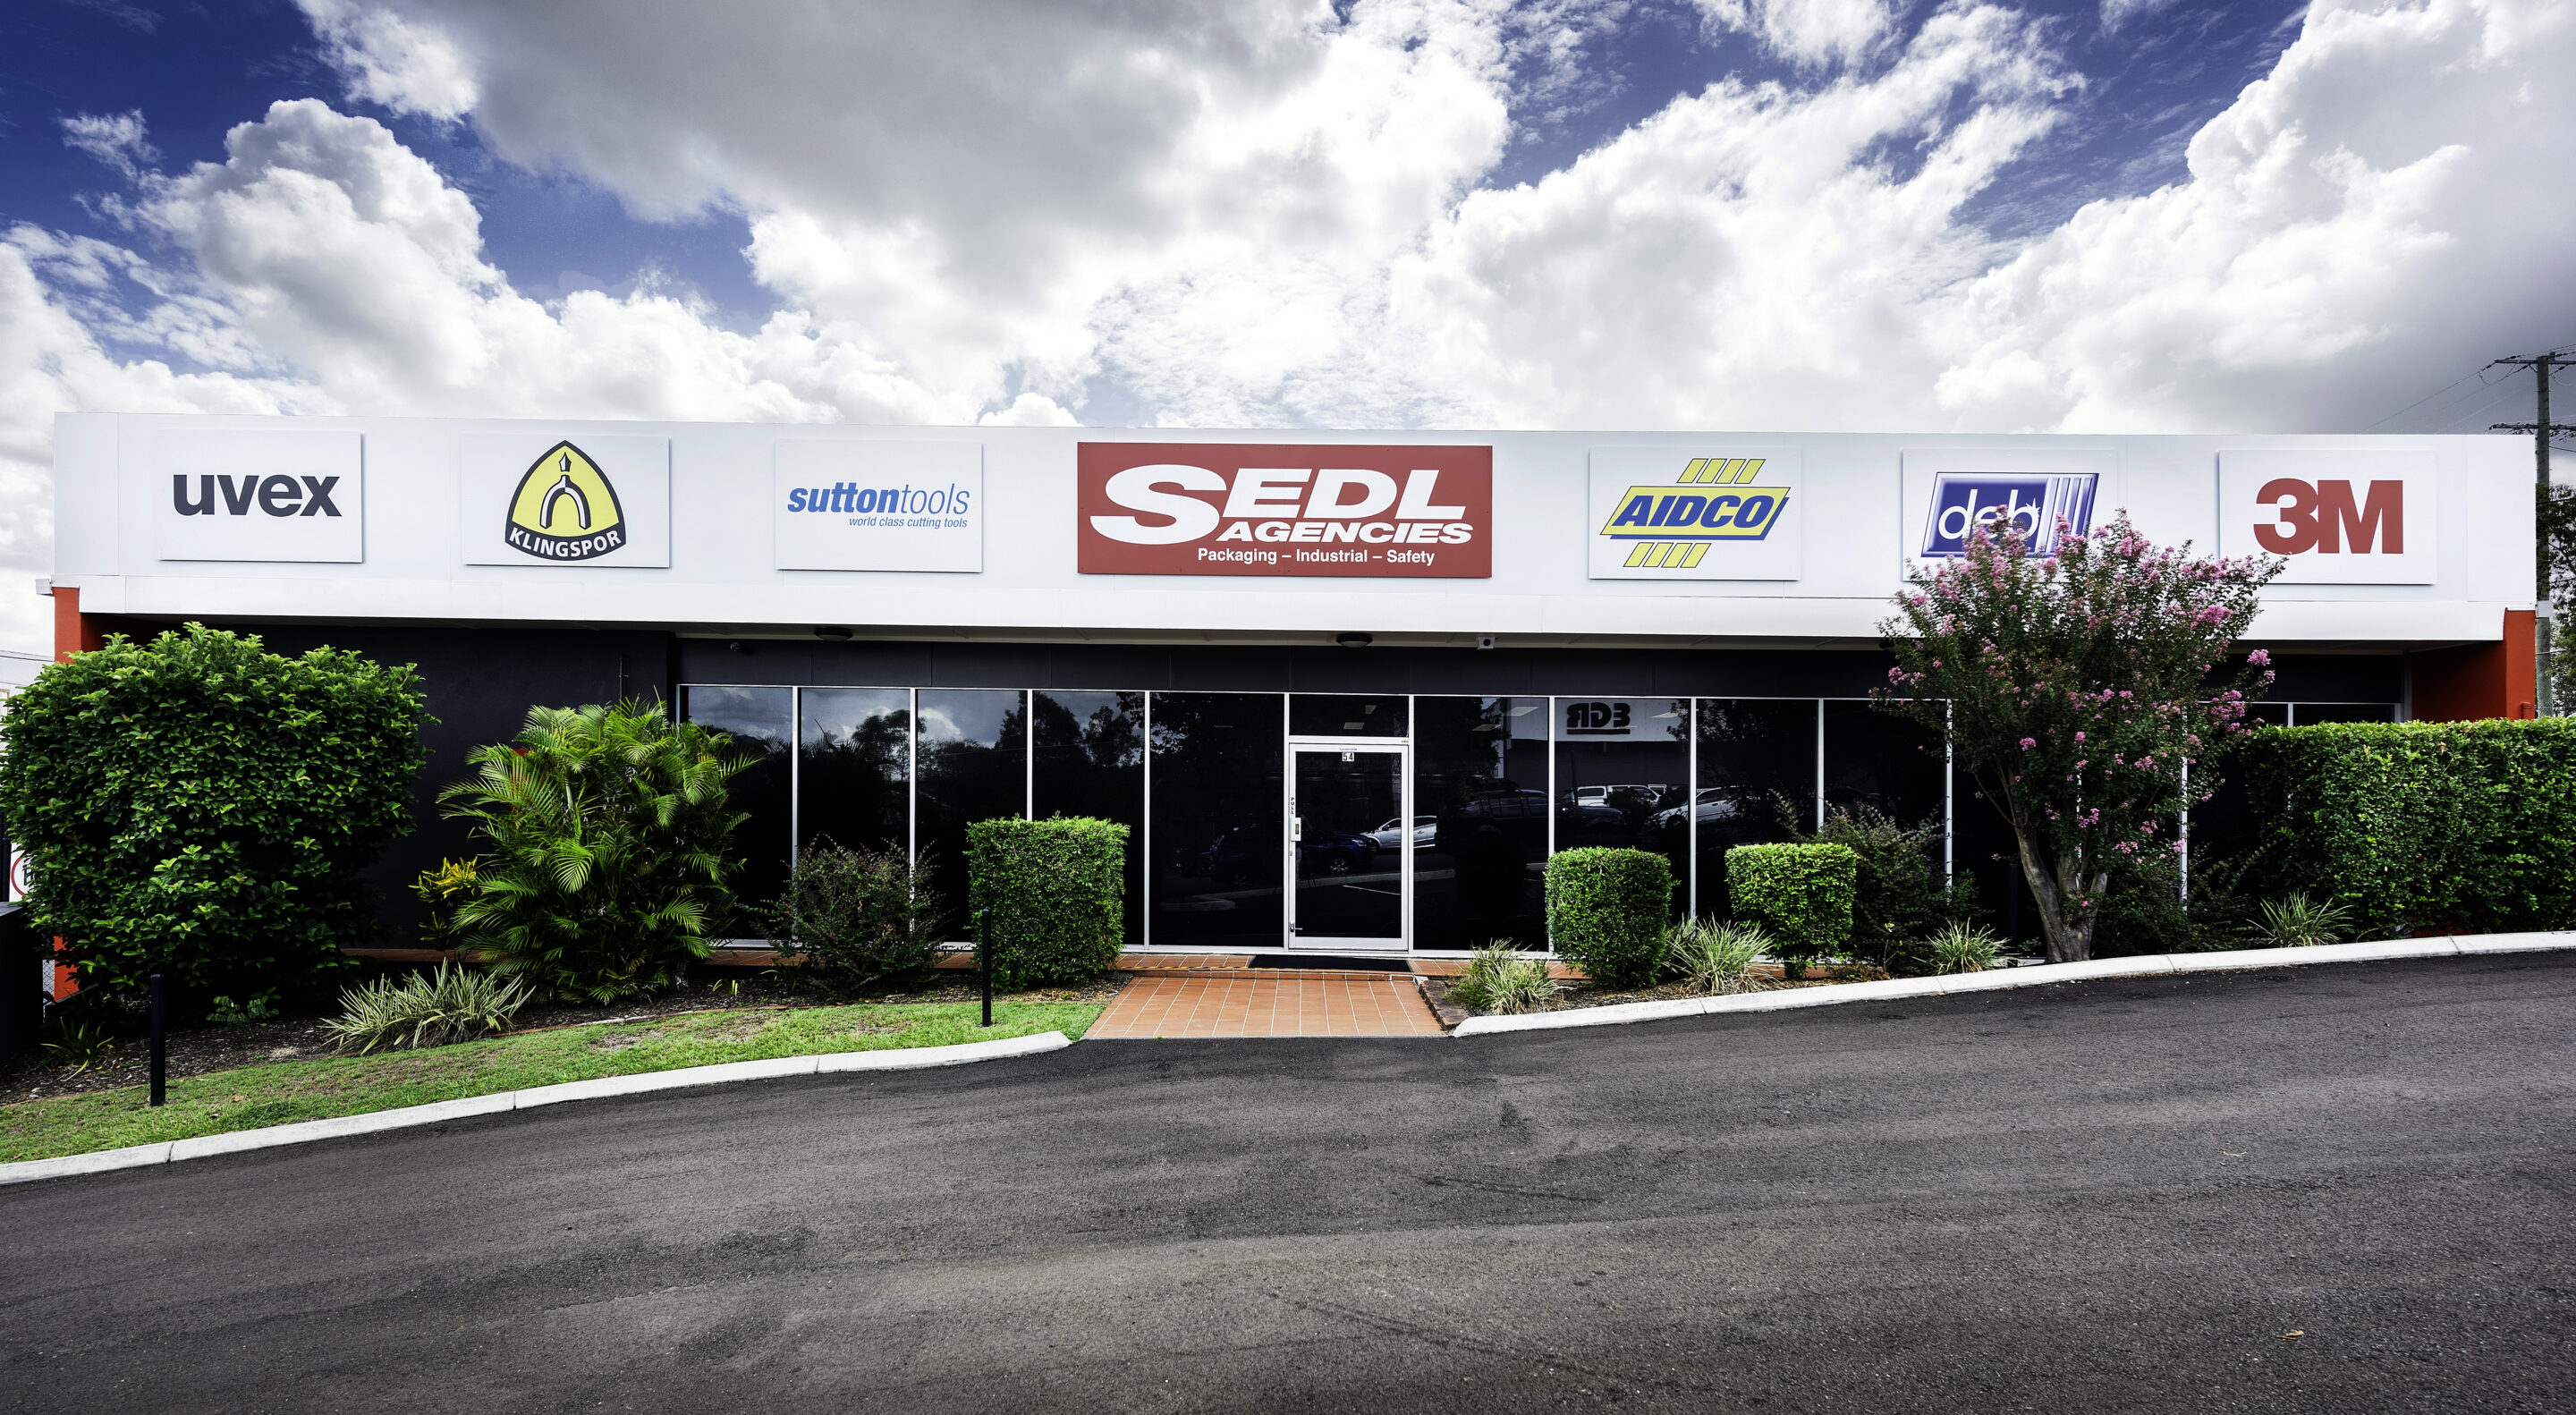 SEDL agencies Brisbane: Paint, Packaging, Safety, Industrial, AIDCO, and more